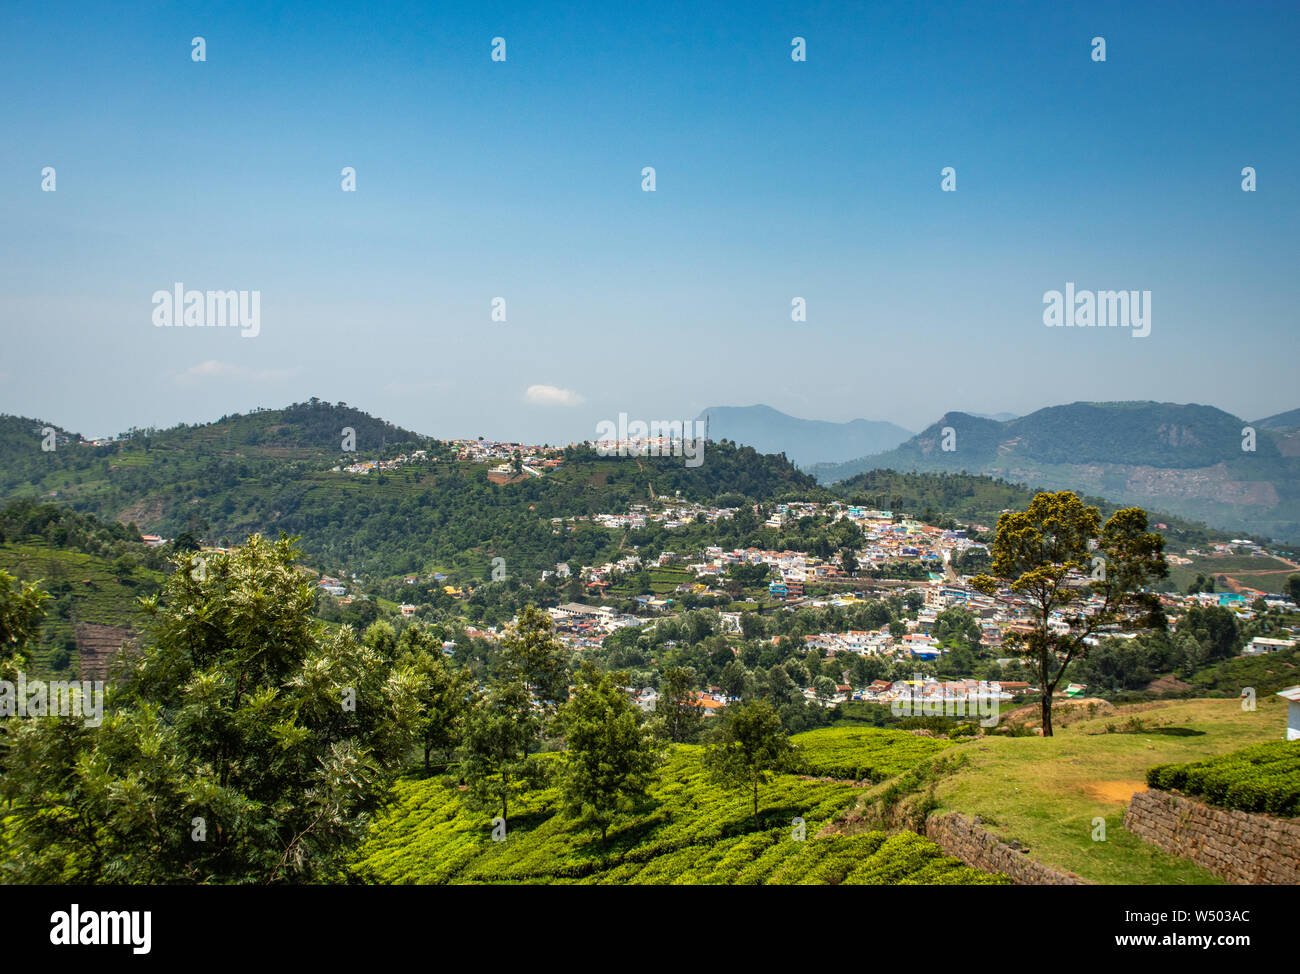 hill station view from hill top image is taken at ooty tamilnadu showing the natural beauty. Stock Photo